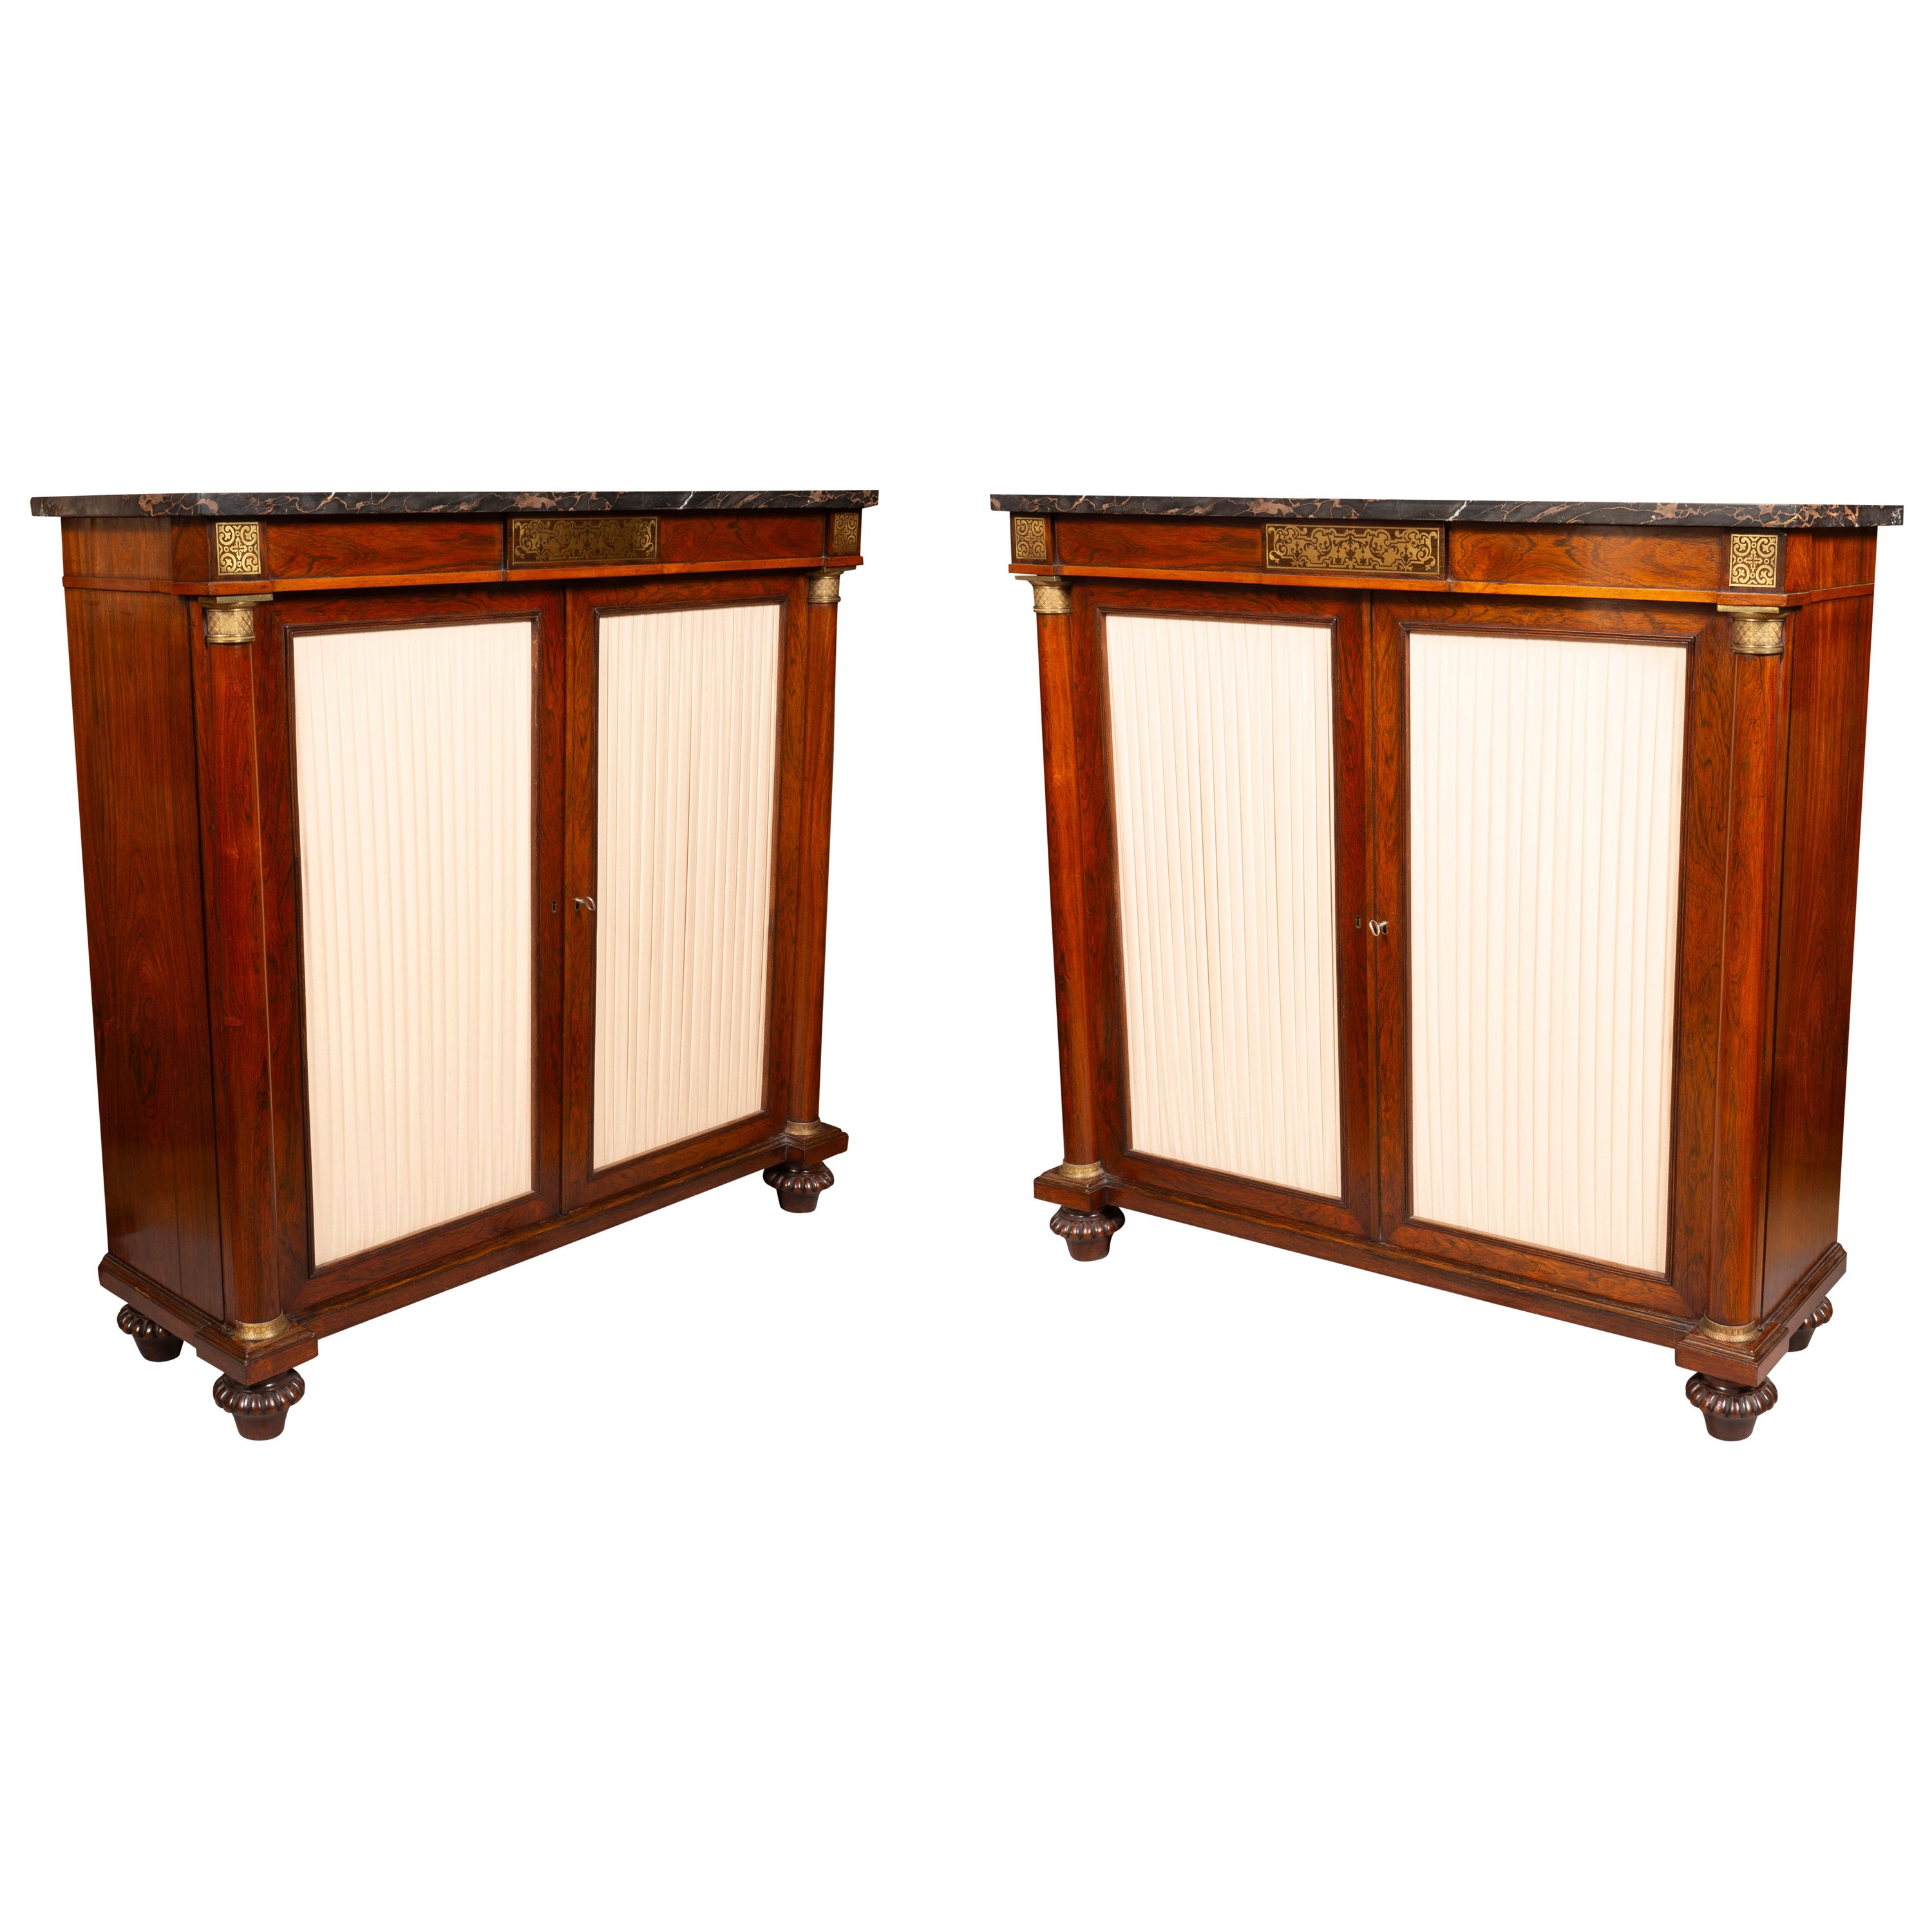 Pair Of Regency Rosewood And Brass Inlaid Cabinets.